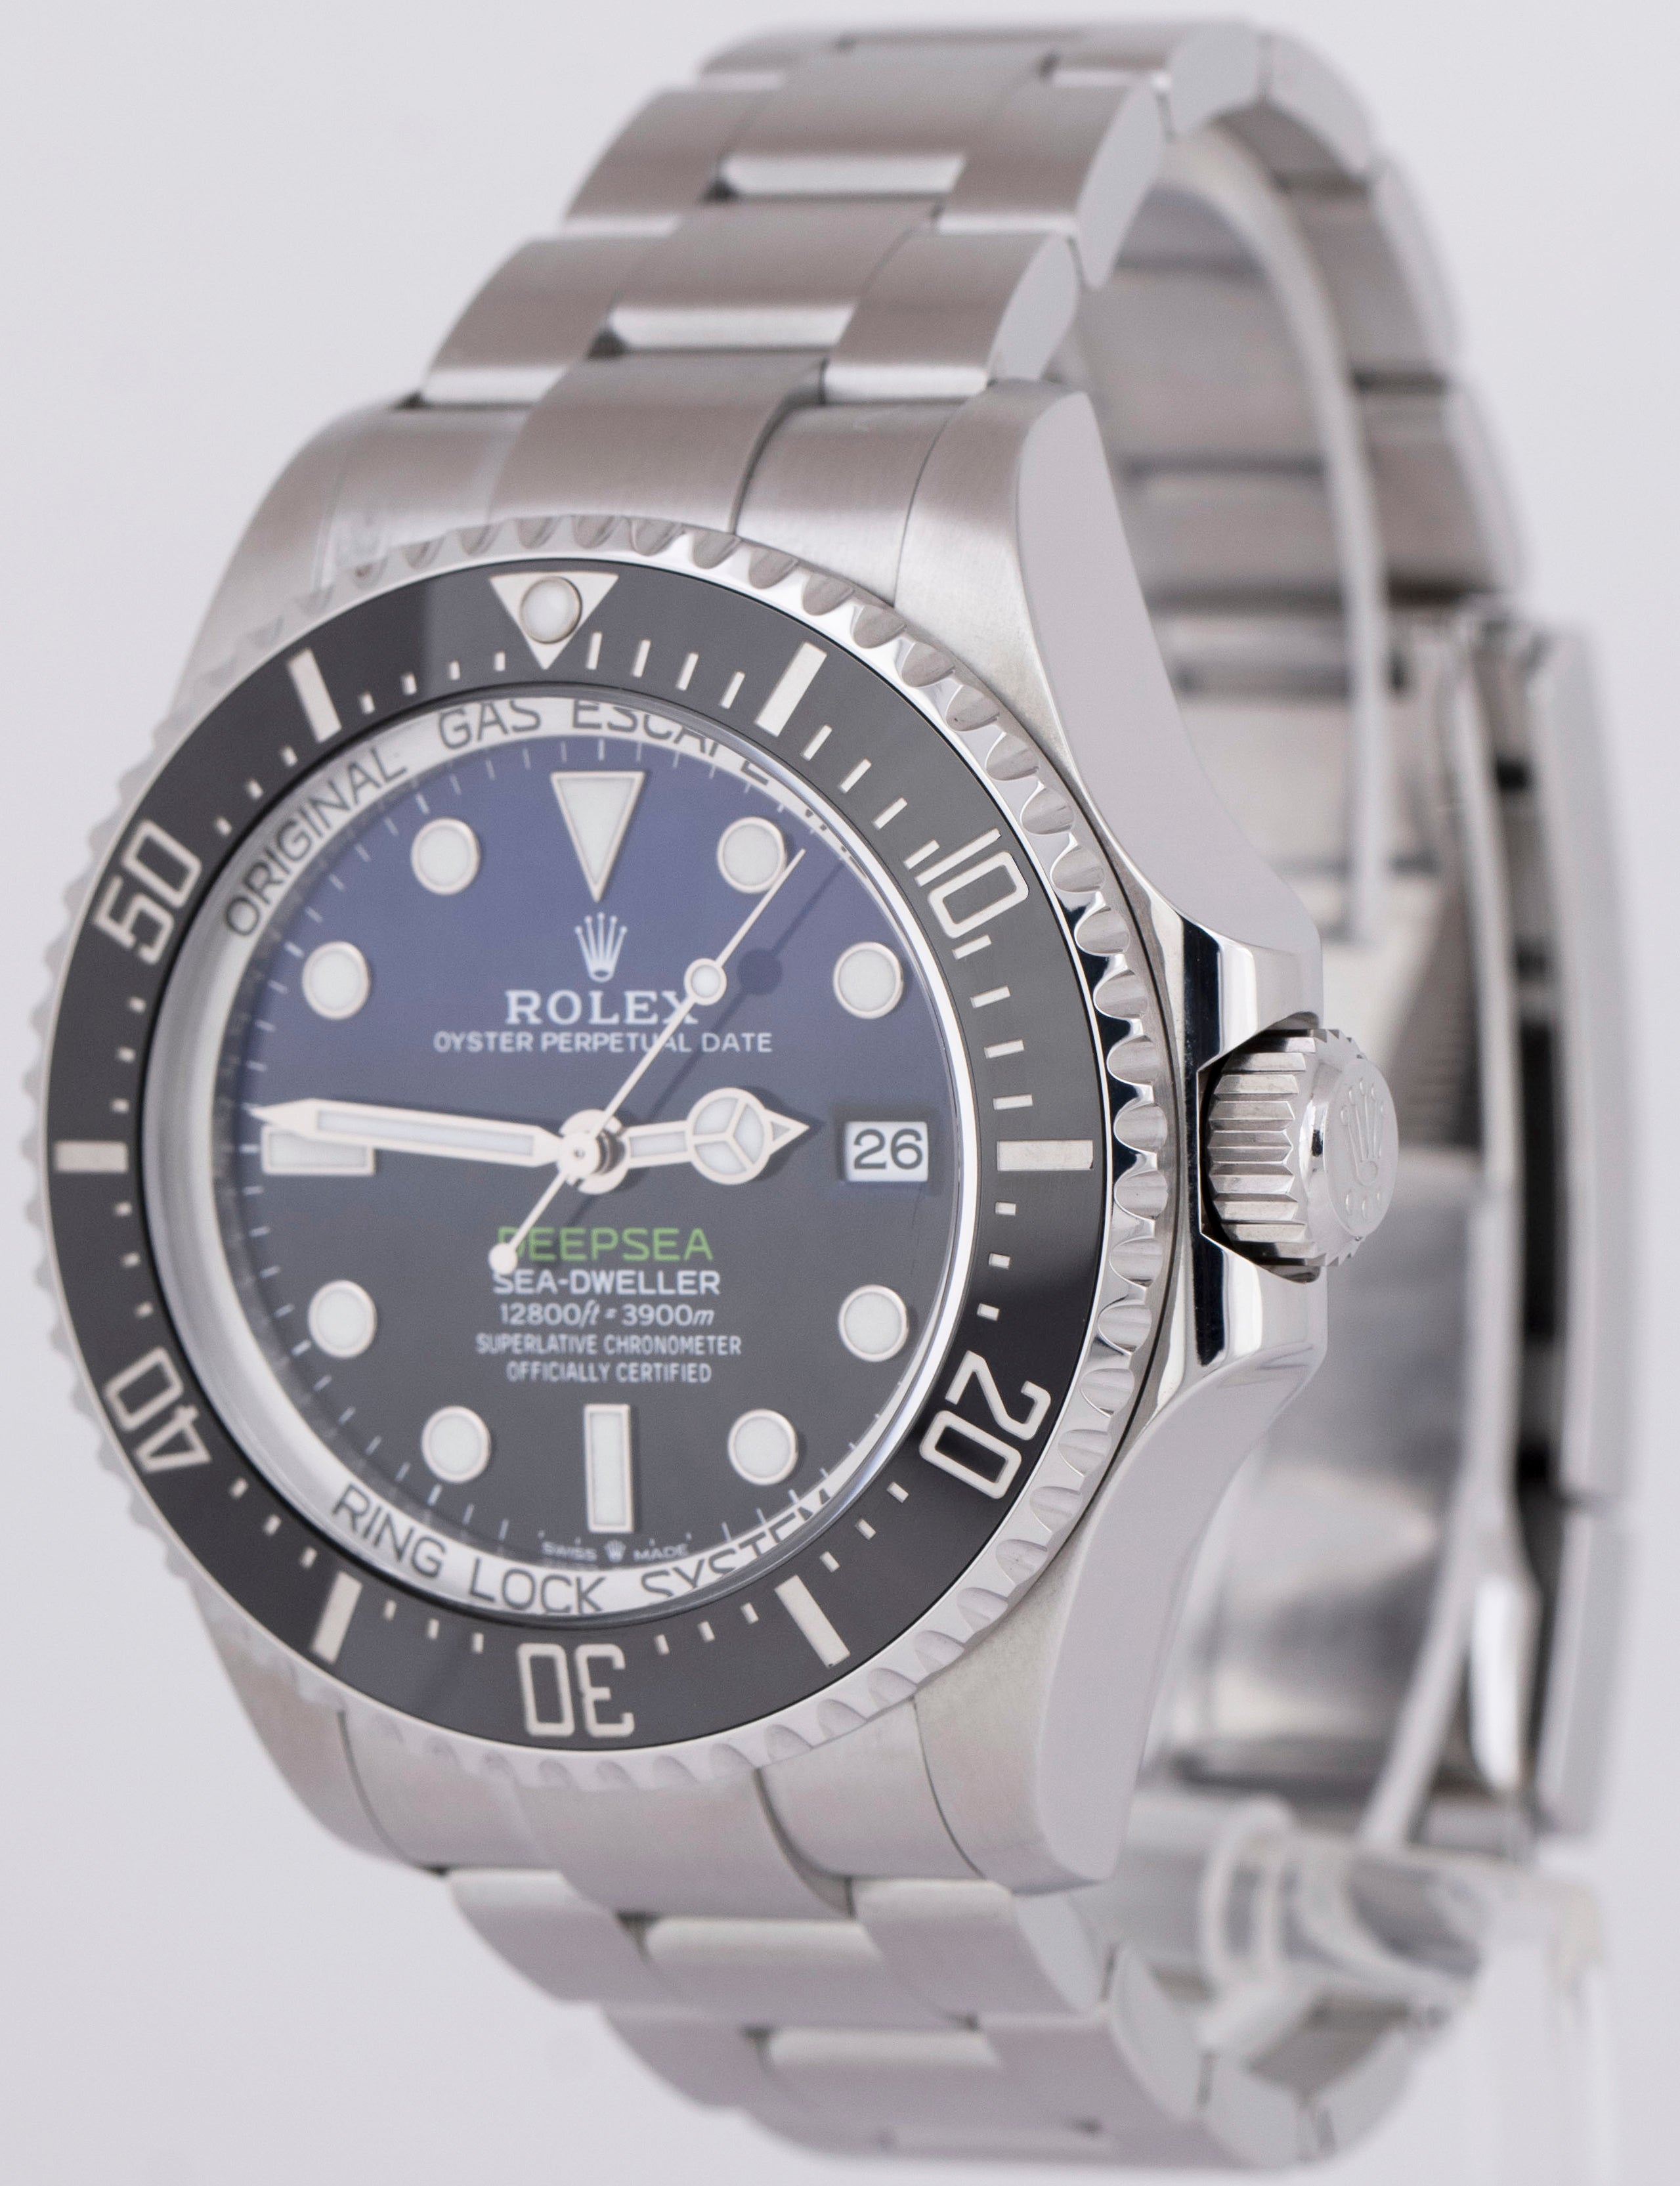 Watch Spotting: Cameron Diaz Seen Wearing Rolex Submariner in 'Knight and  Day'